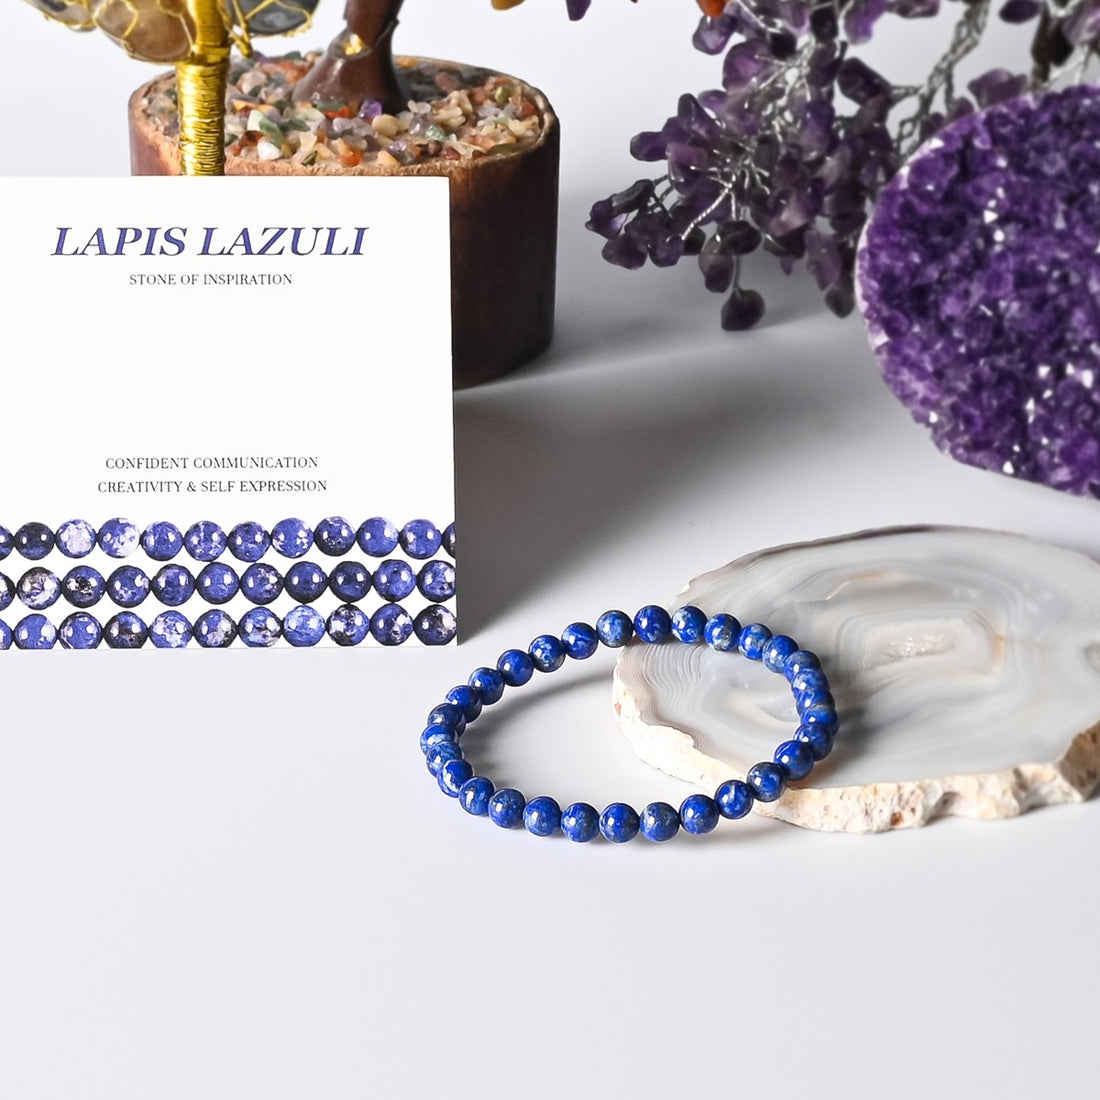 Visual representation of confidence and enhanced communication associated with the Lapis Lazuli Stretch Bracelet, promoting self-expression and understanding